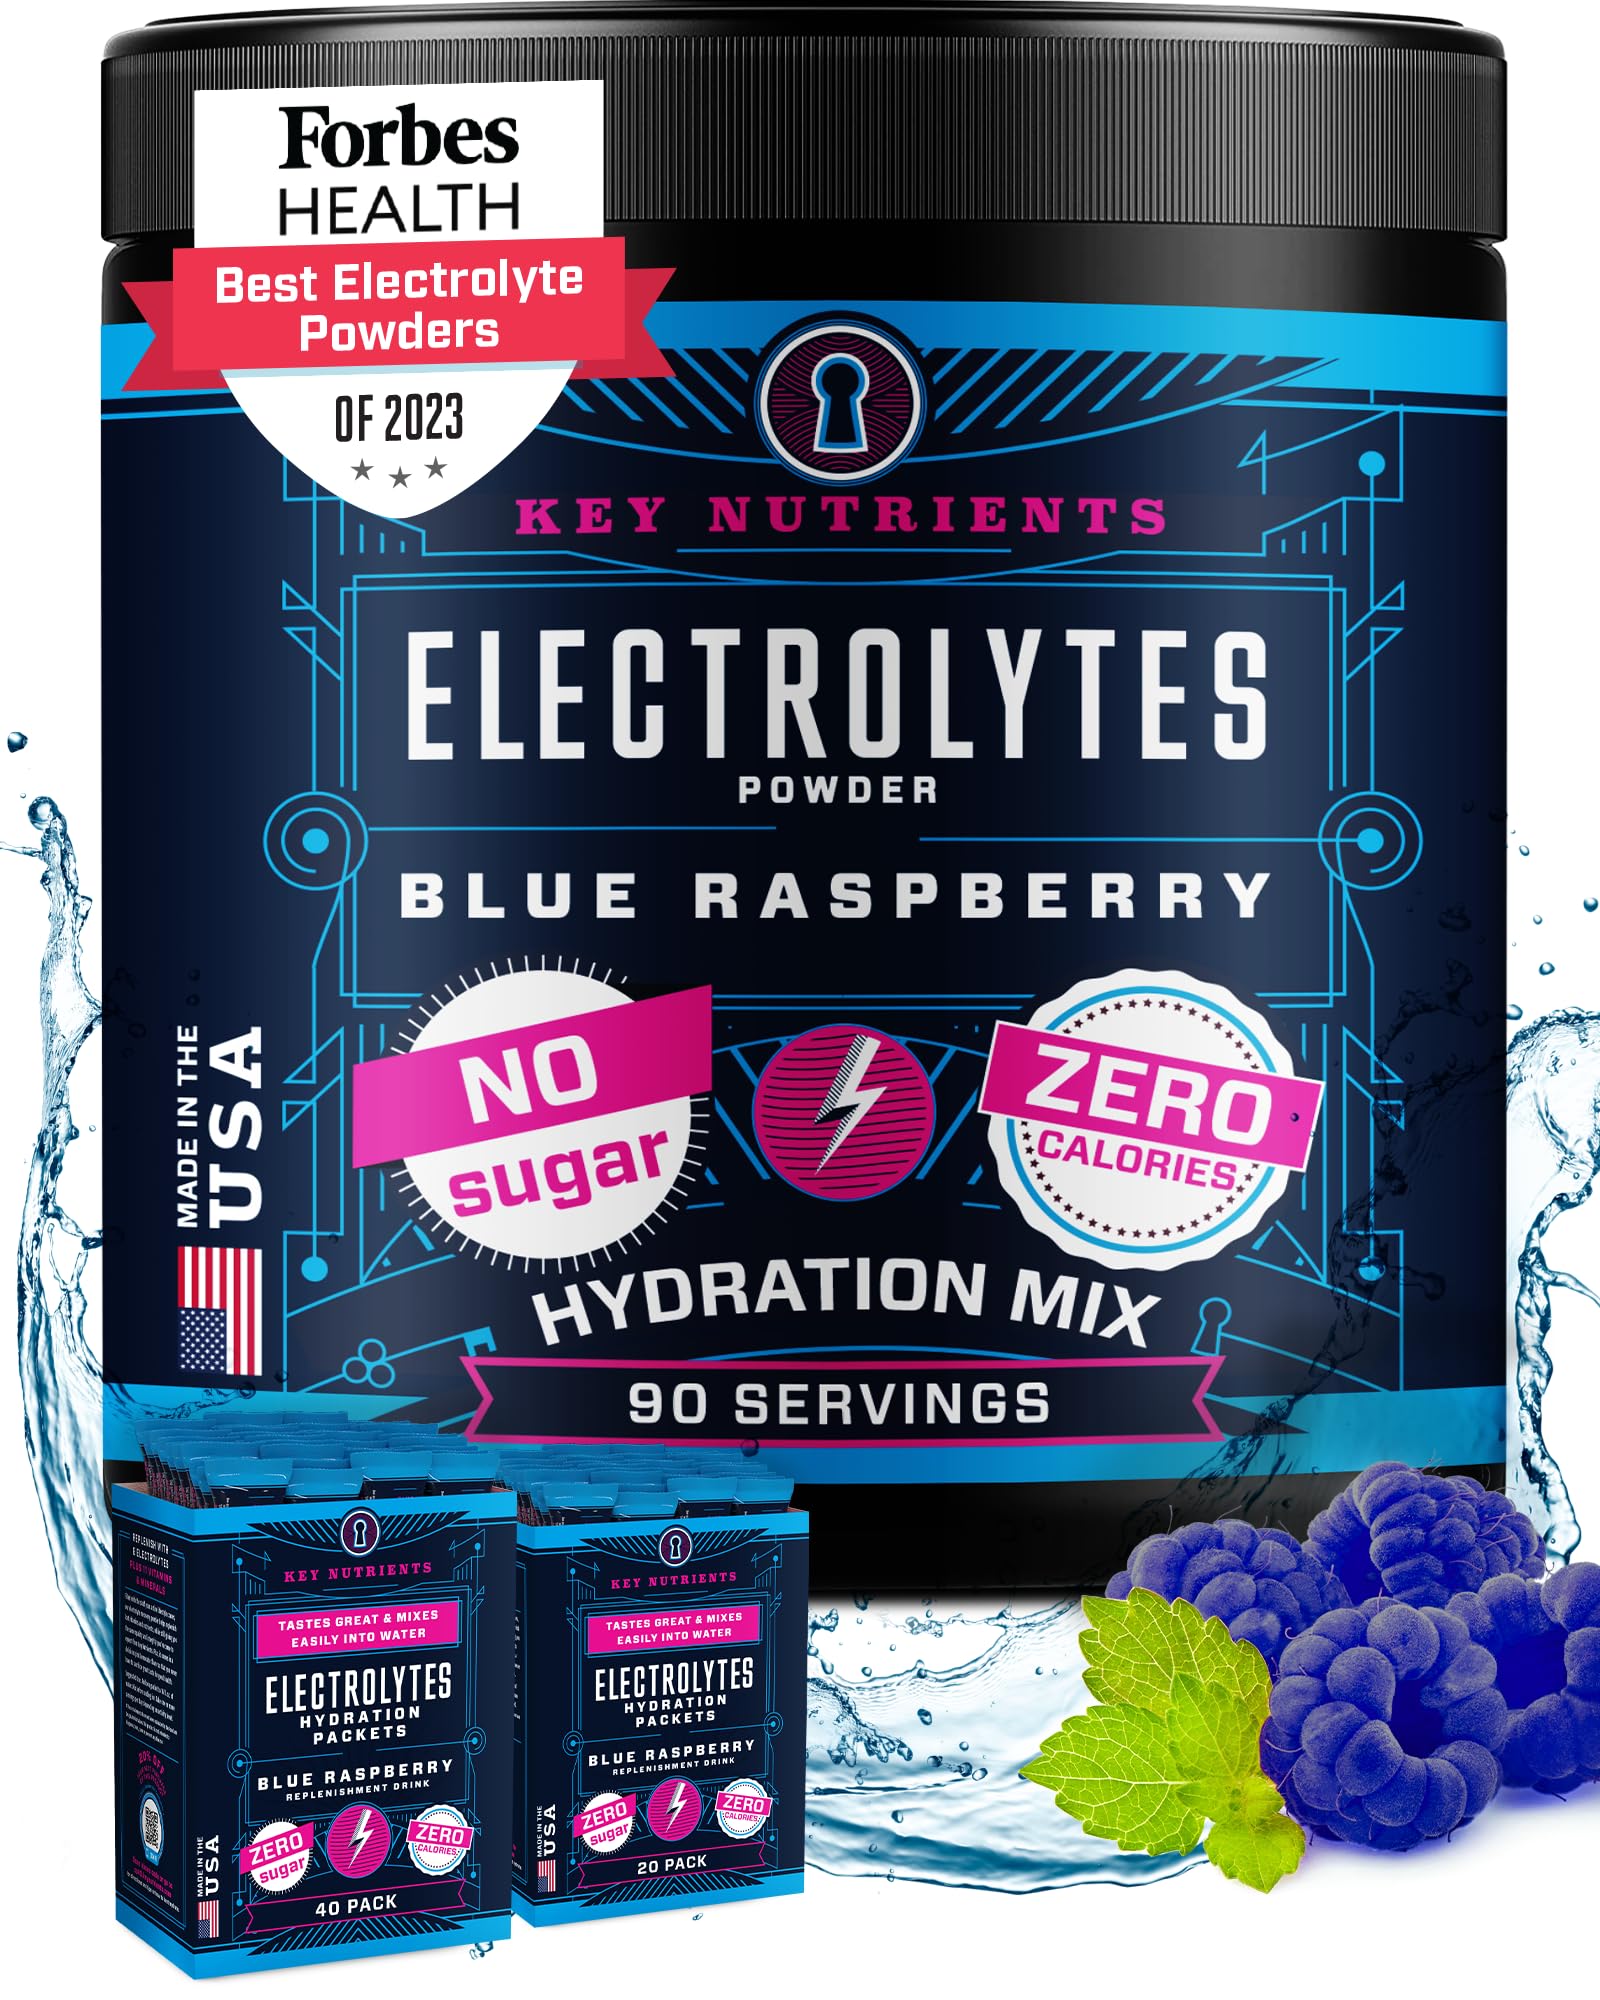 KEY NUTRIENTS Electrolytes Powder No Sugar - Delicious Blue Raspberry Electrolyte Drink Mix - Hydration Powder - No Calories, Gluten Free - Powder and Packets (20, 40 or 90 Servings)